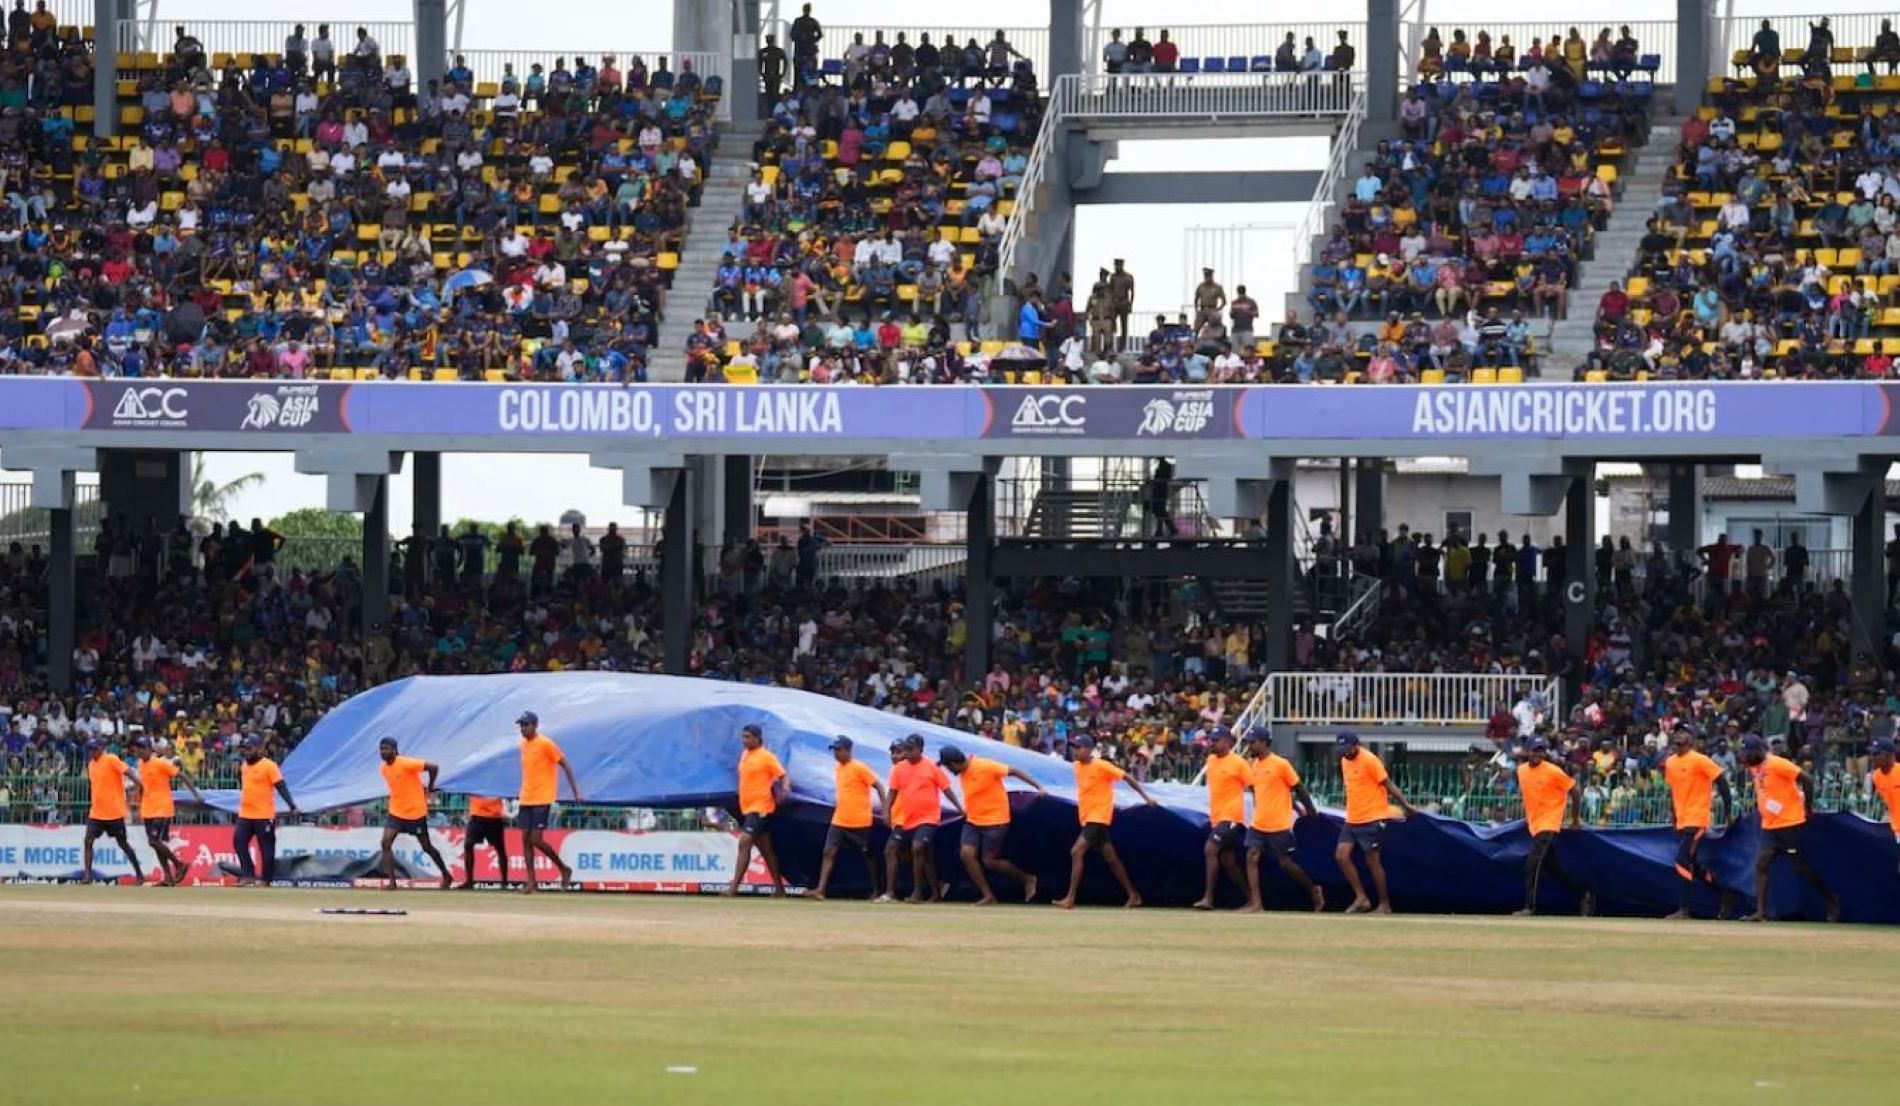 Fans were deprived of an on-time start to the much-awaited Asia Cup final